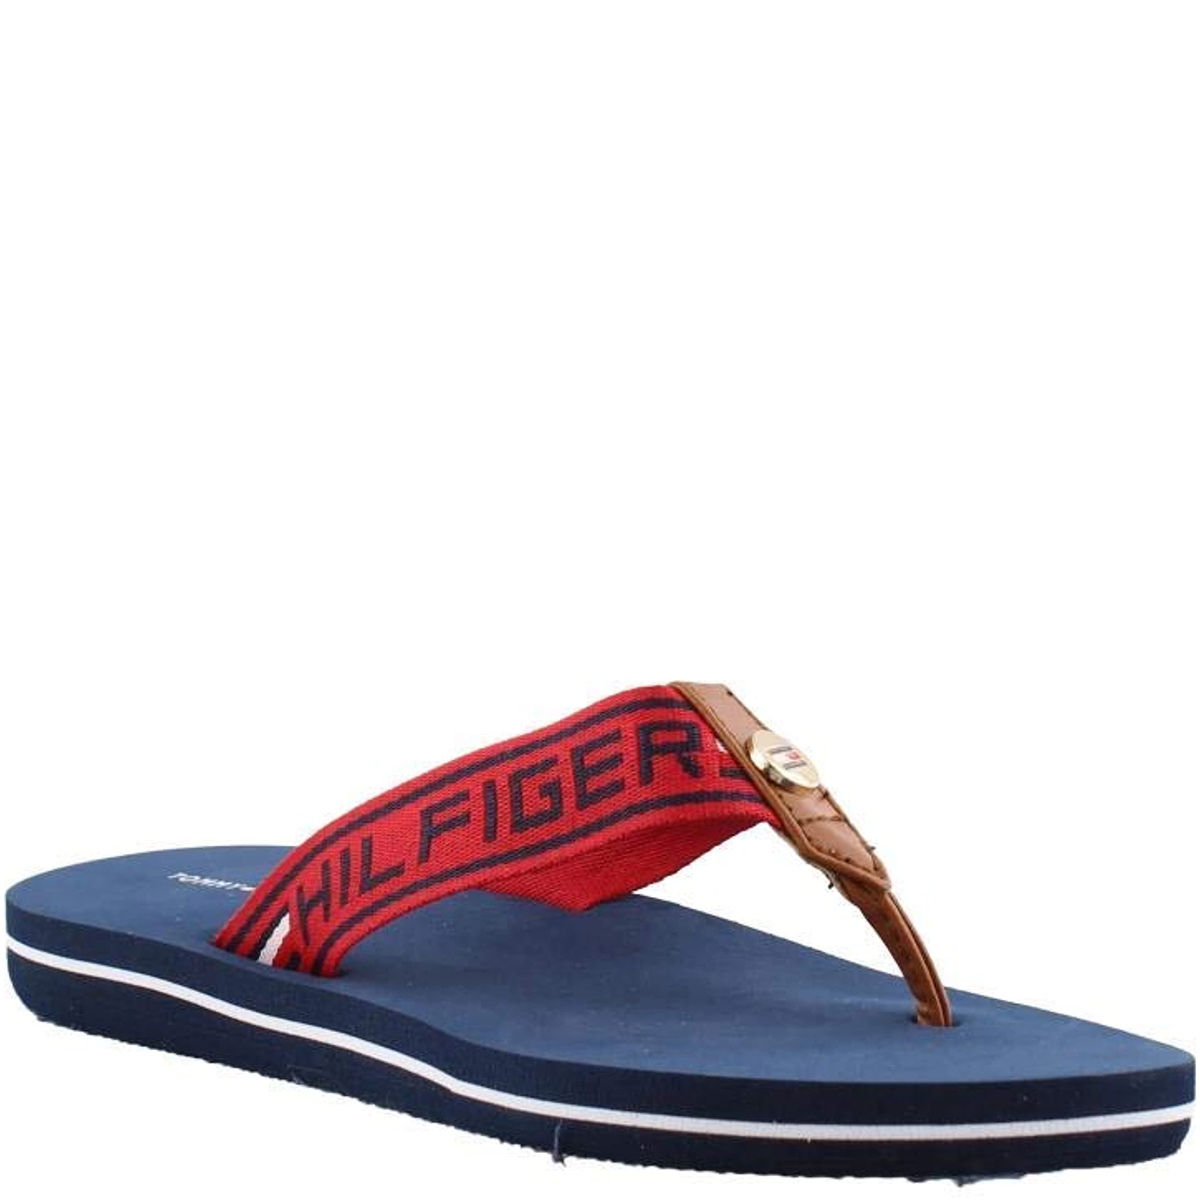 Tommy Hilfiger Womens Cleen2 Fabric Red Thong Sandals 8 M